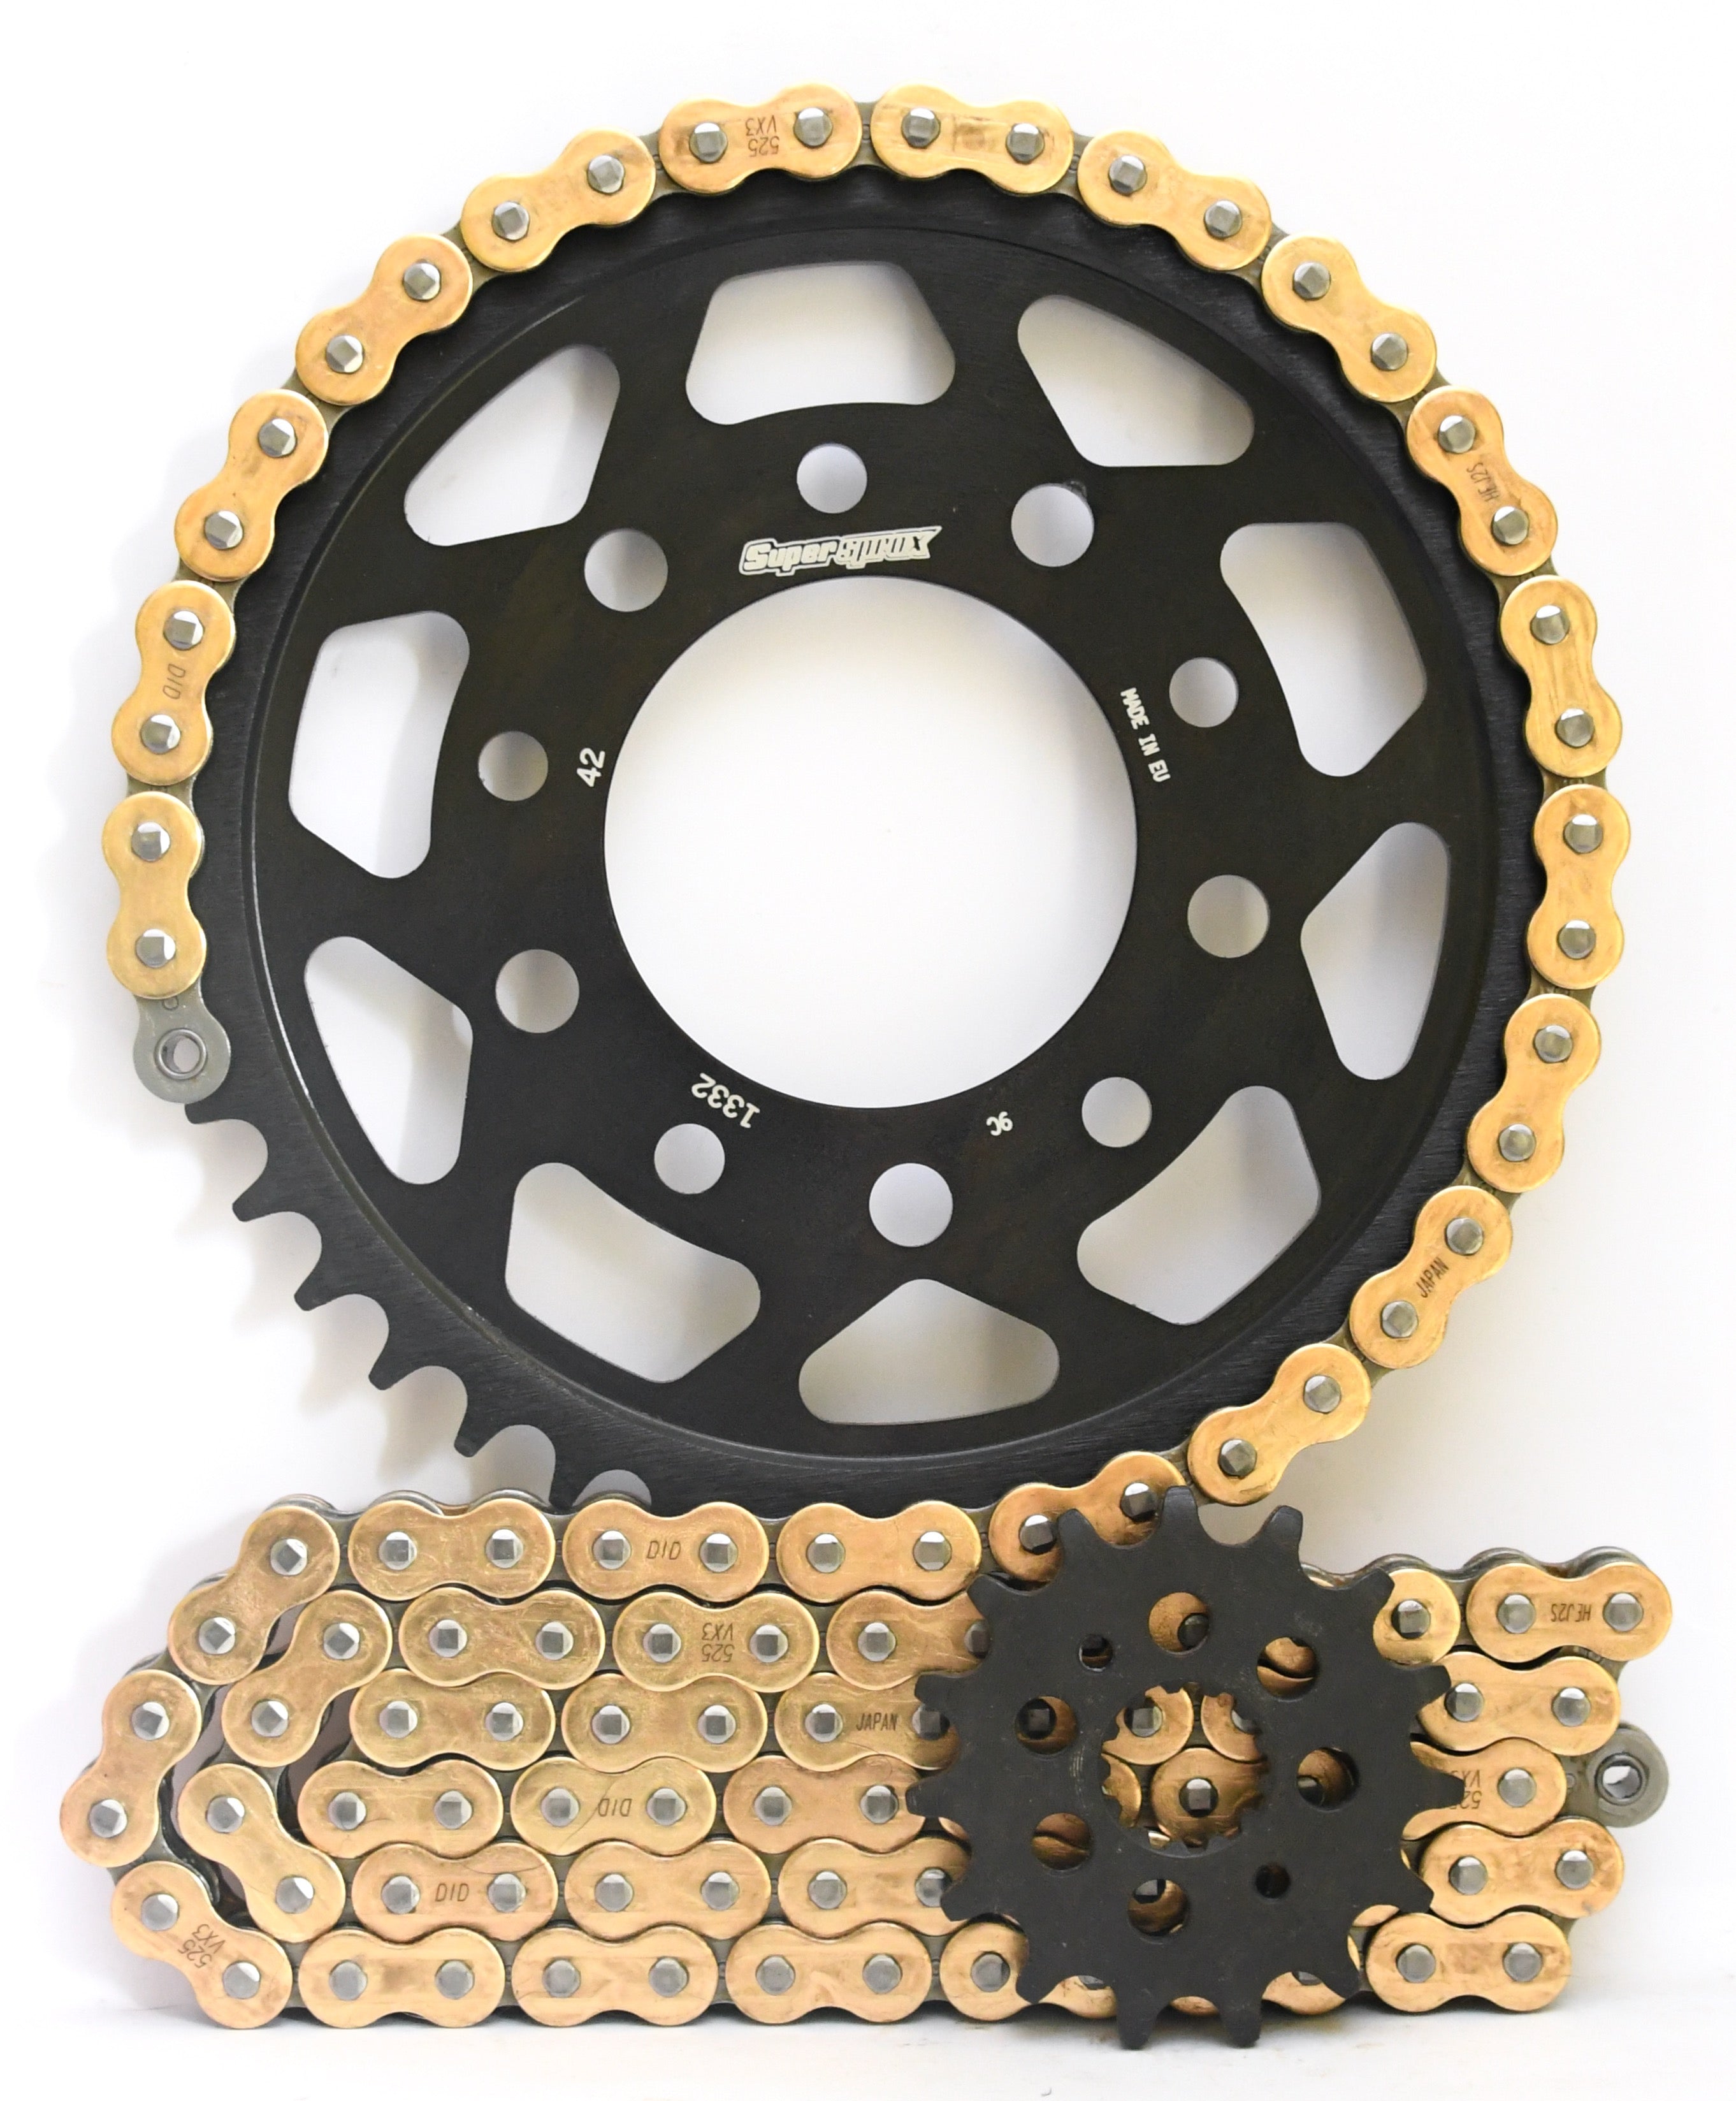 Supersprox Steel Edge Chain & Sprocket Kit for Triumph America 800 2002-2006 - Standard Gearing